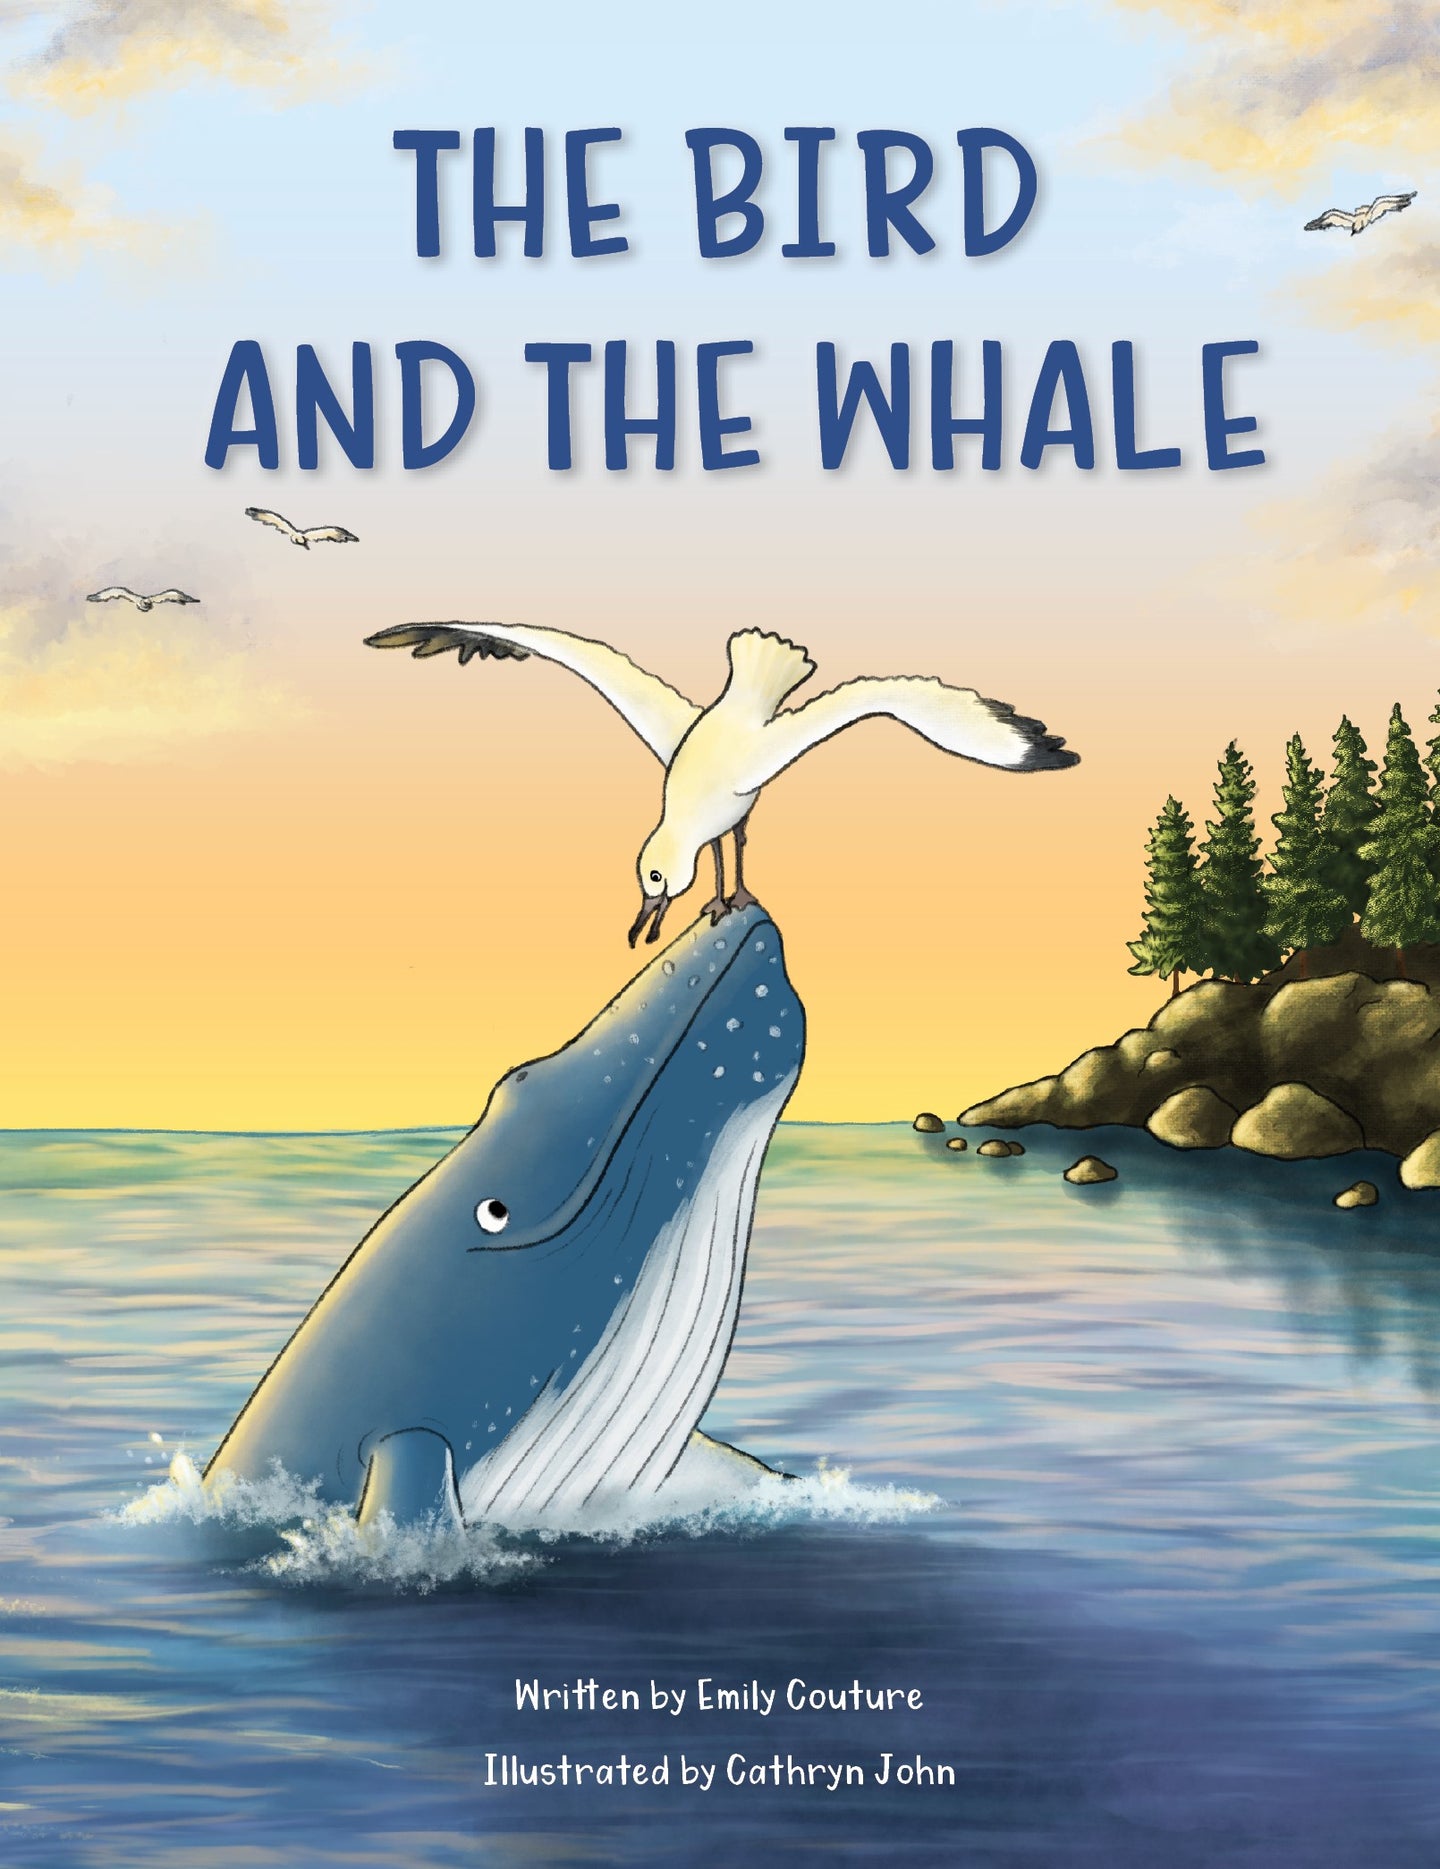 THE BIRD AND THE WHALE (Signed hardcover & dust jacket)